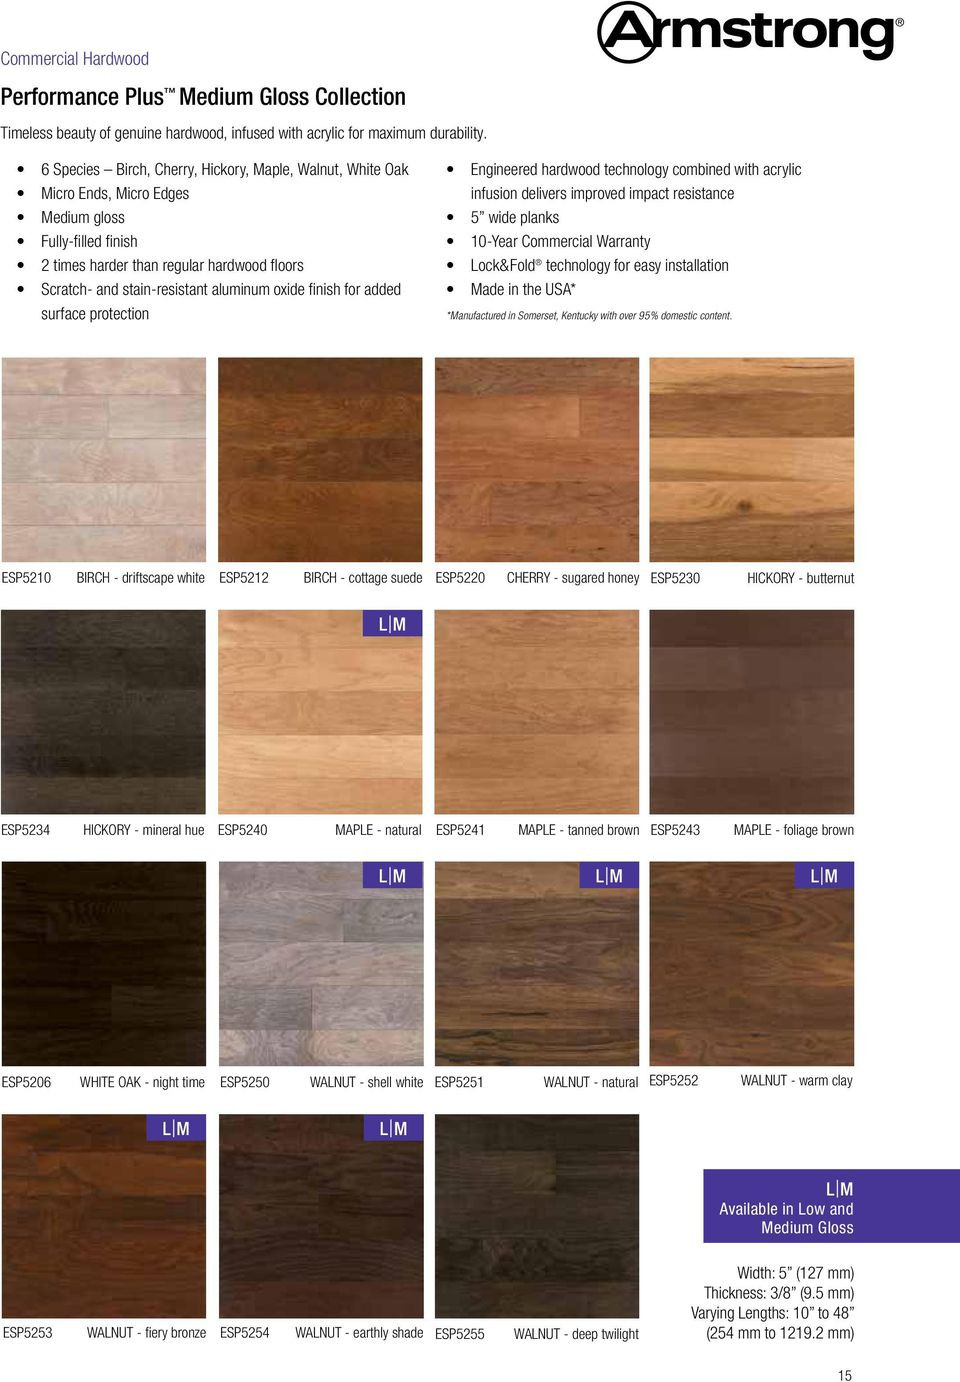 29 Spectacular Project source 5 In Brown Oak Hardwood Flooring 2024 free download project source 5 in brown oak hardwood flooring of performance plus midtown pdf intended for oxide finish for added surface protection engineered hardwood technology combined with acrylic in